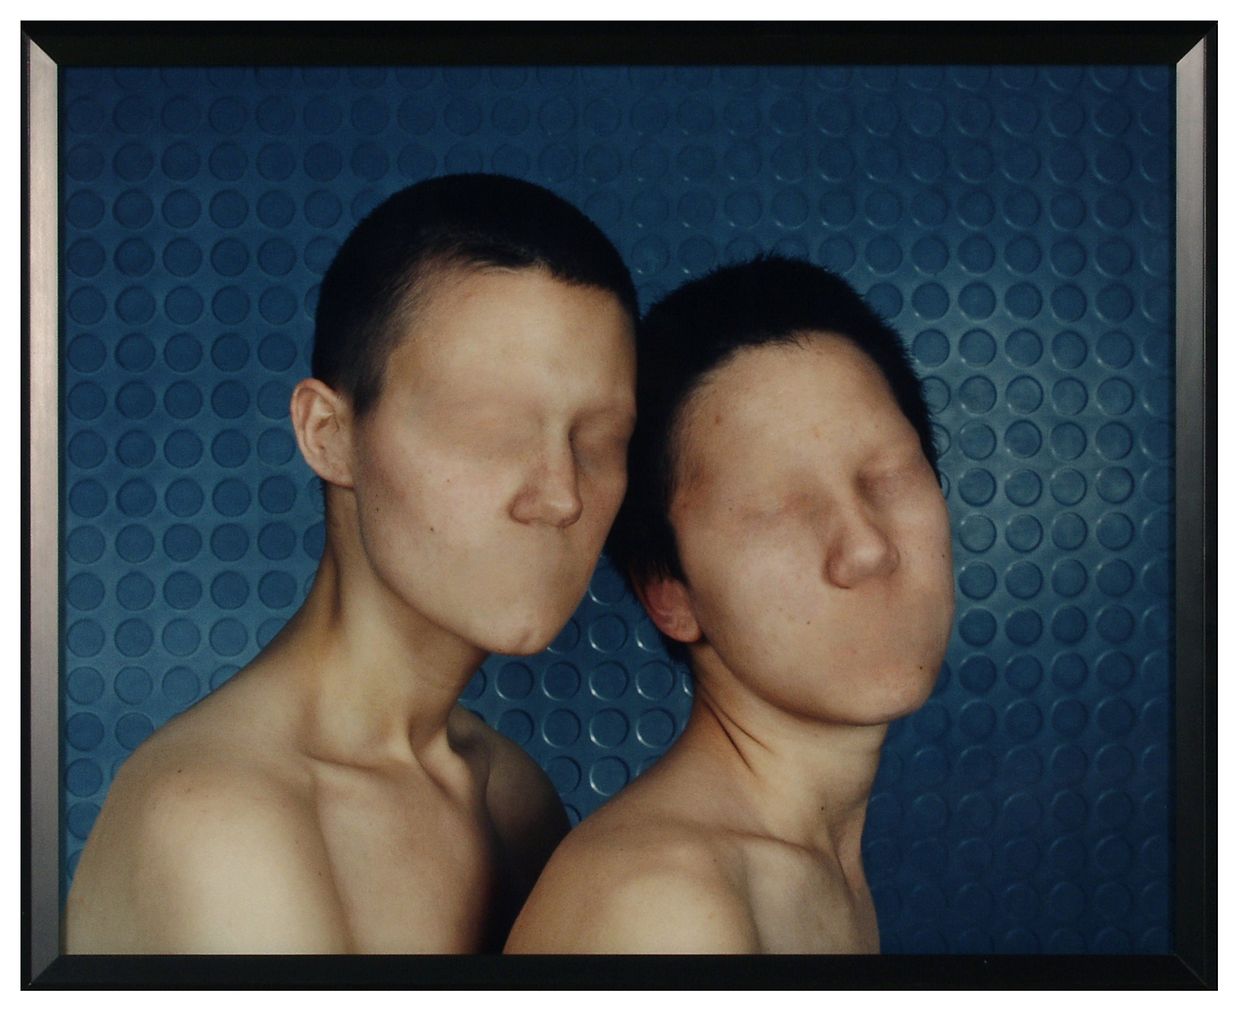 Pam and Kim, from the series Dystopia, 1994-95